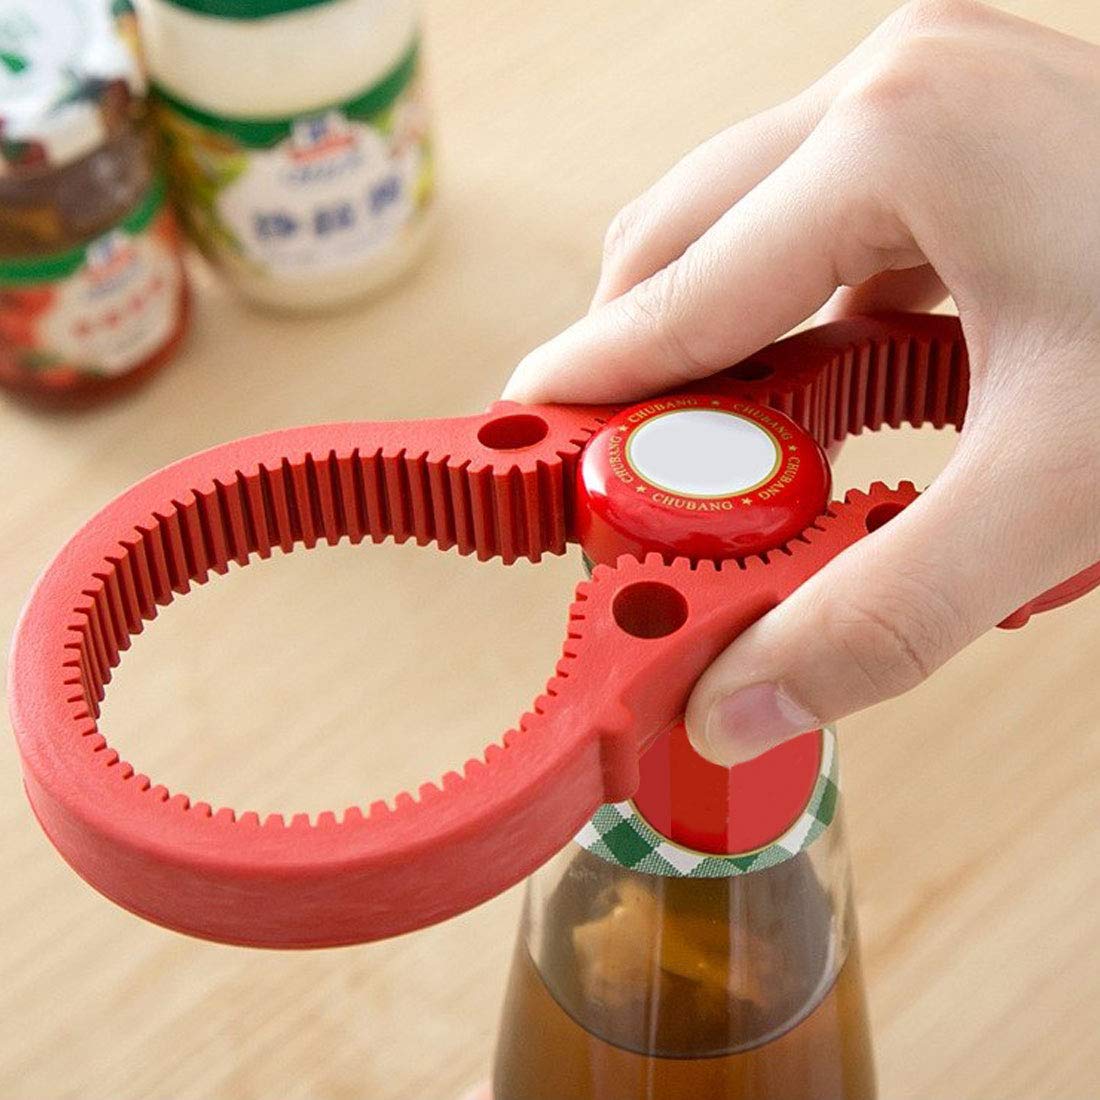 Parts Express 3in1 Container Bottle Jar Lid Can Opener Hand Easy Twist Kitchen Tool Silicon Jar Opener Screw Cap Jar Bottle Wrench Red, Green, Blue Random color (Multicolored)